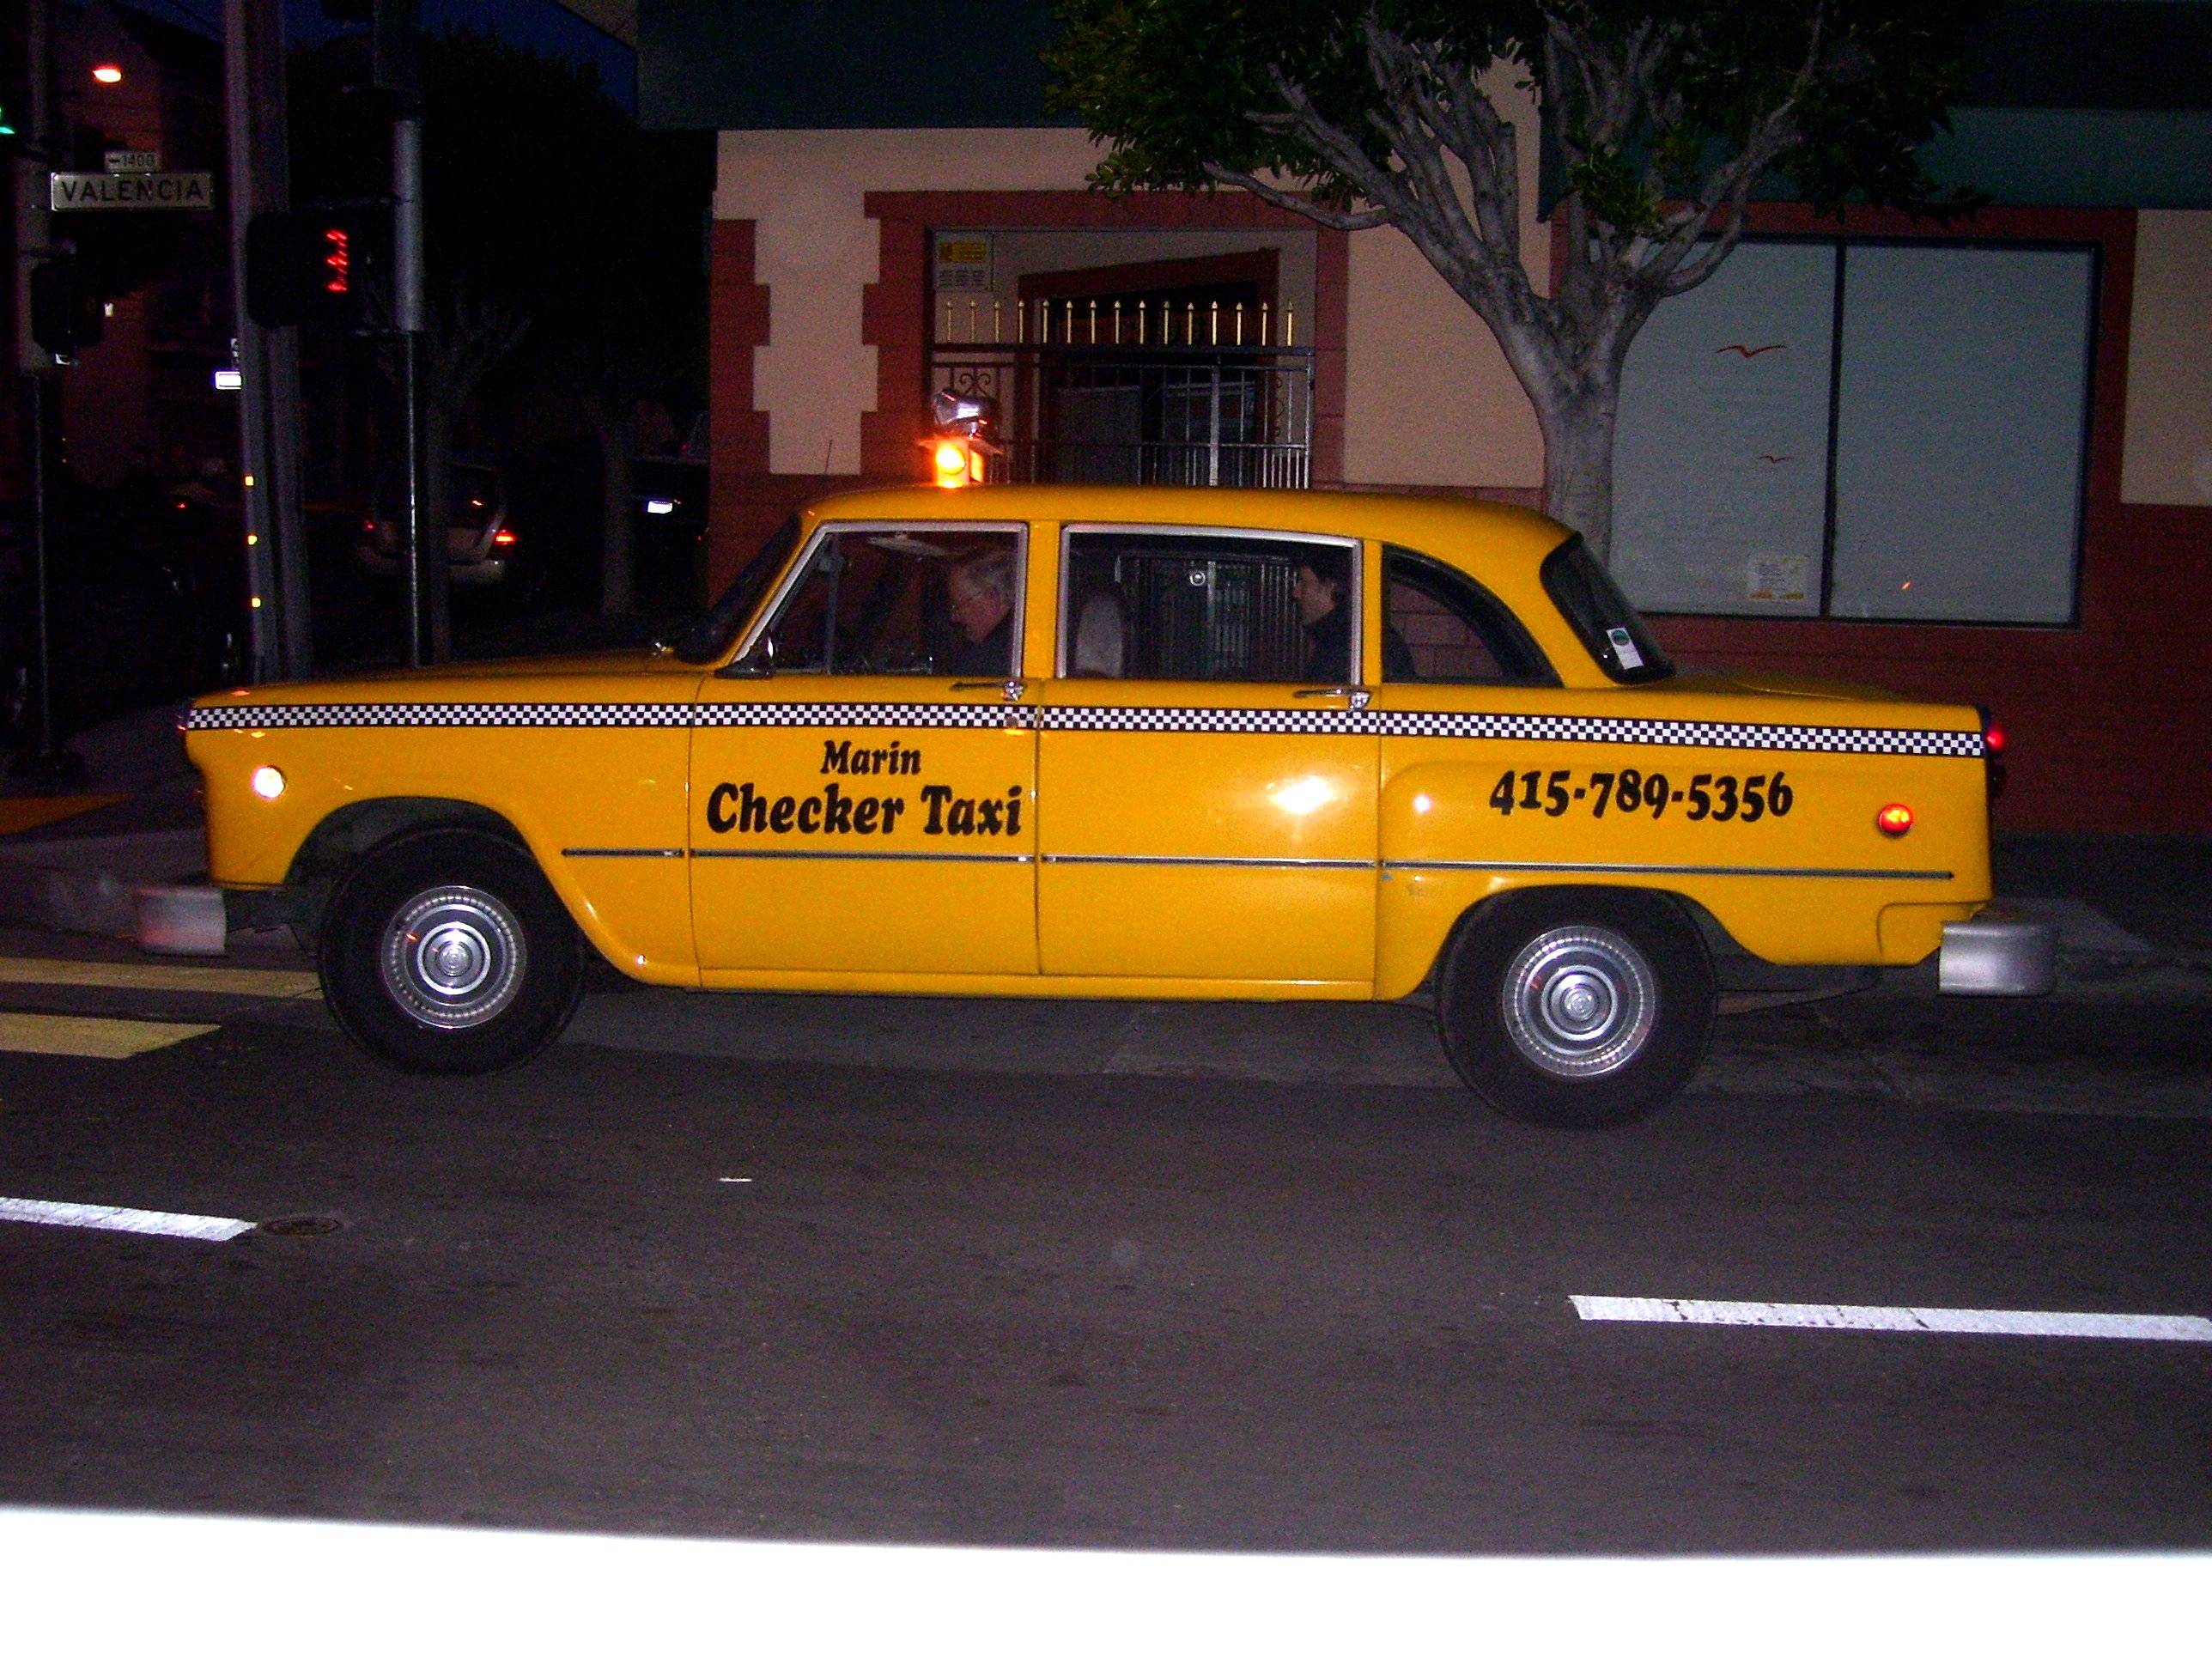 Yellow Checker Taxi Drop Off | Flickr - Photo Sharing!